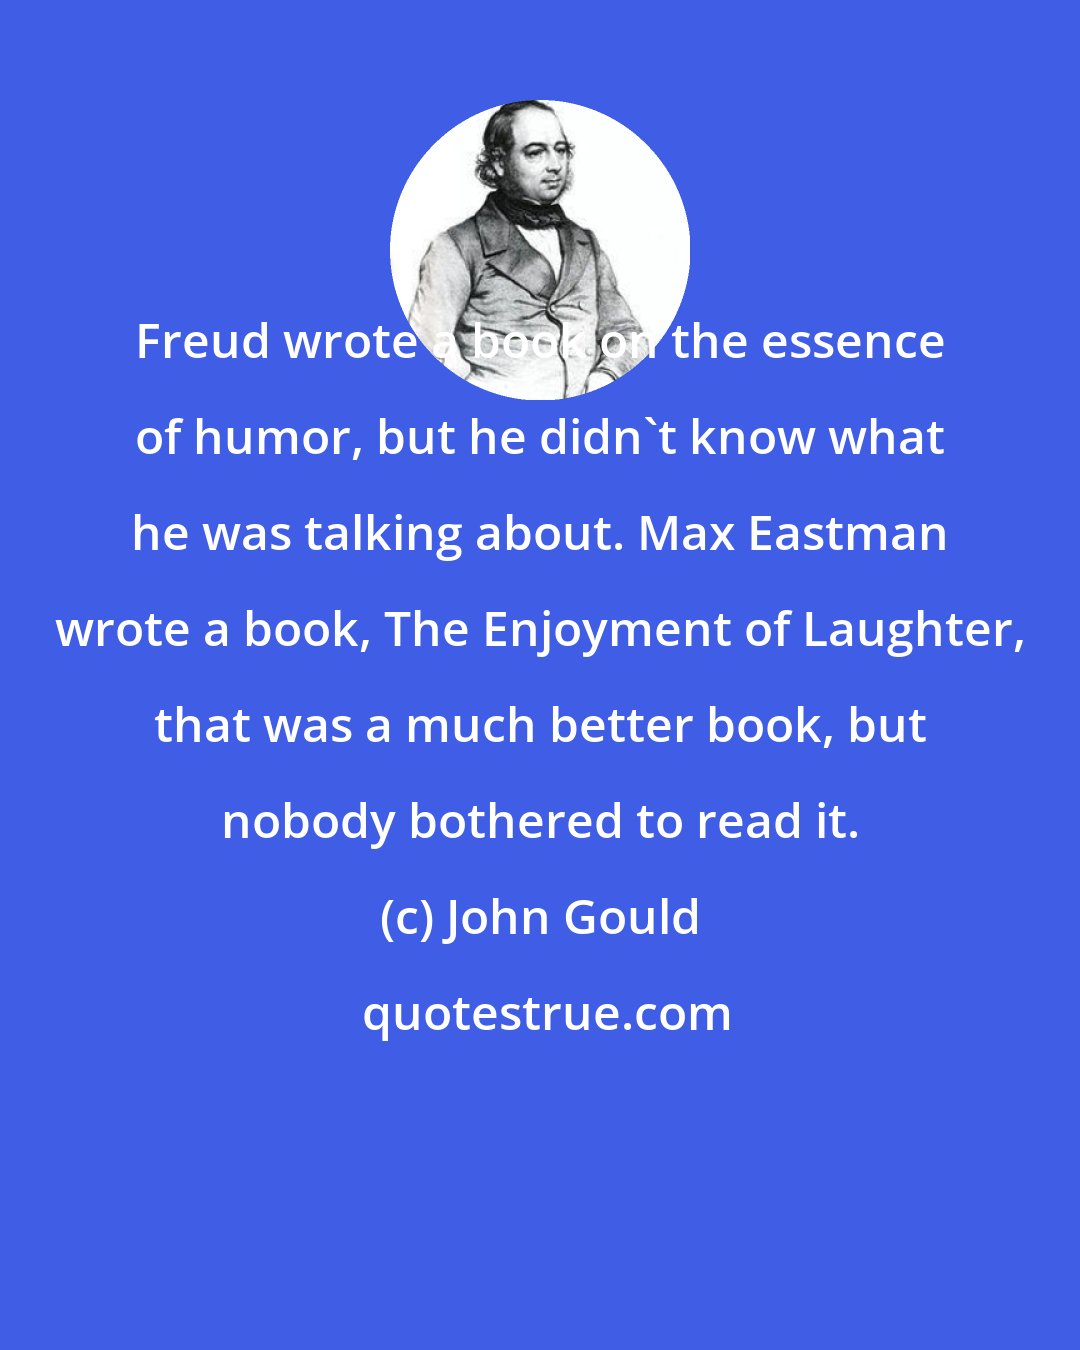 John Gould: Freud wrote a book on the essence of humor, but he didn't know what he was talking about. Max Eastman wrote a book, The Enjoyment of Laughter, that was a much better book, but nobody bothered to read it.